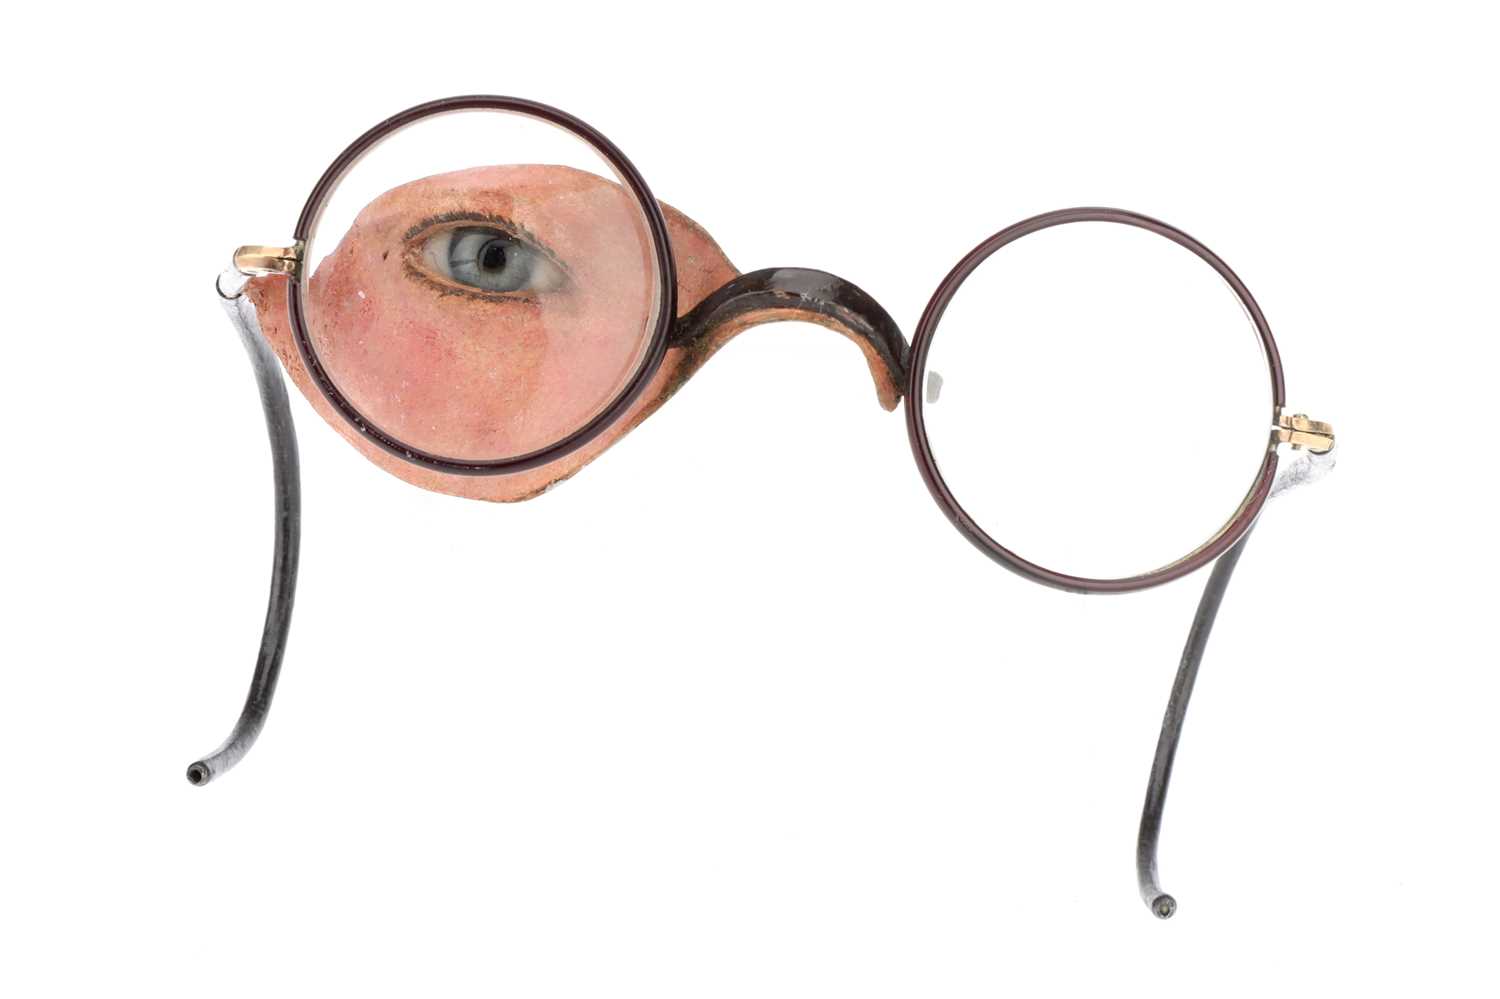 Lot 101 - Medical, Spectacles with Epithesis, Prosthetic Eye and Socket